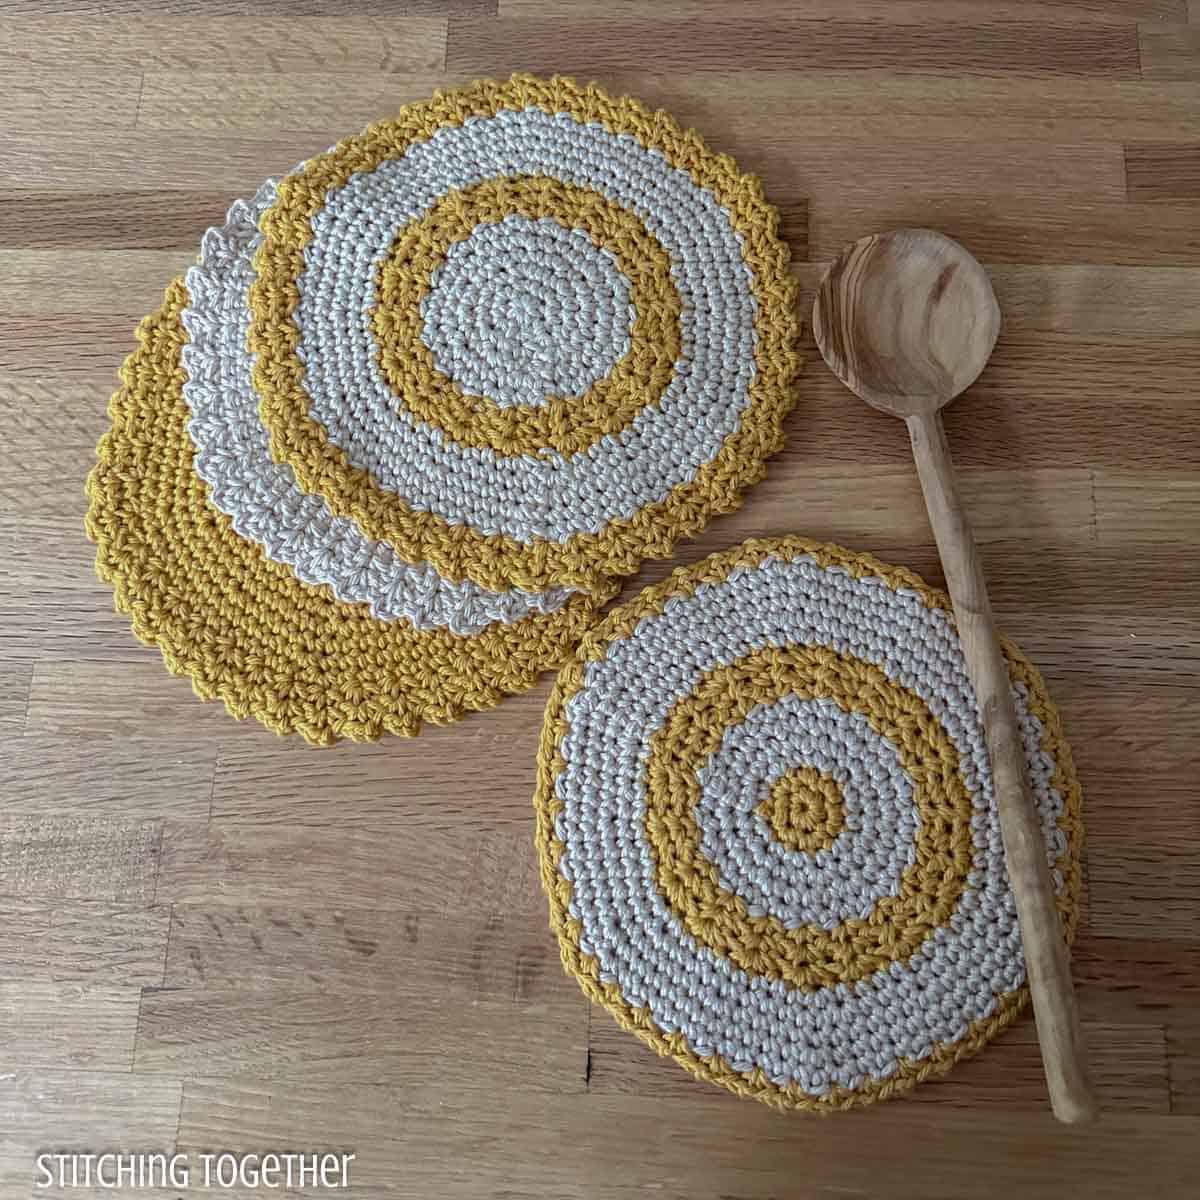 crochet round trivet and round dishcloths with a wooden spoon